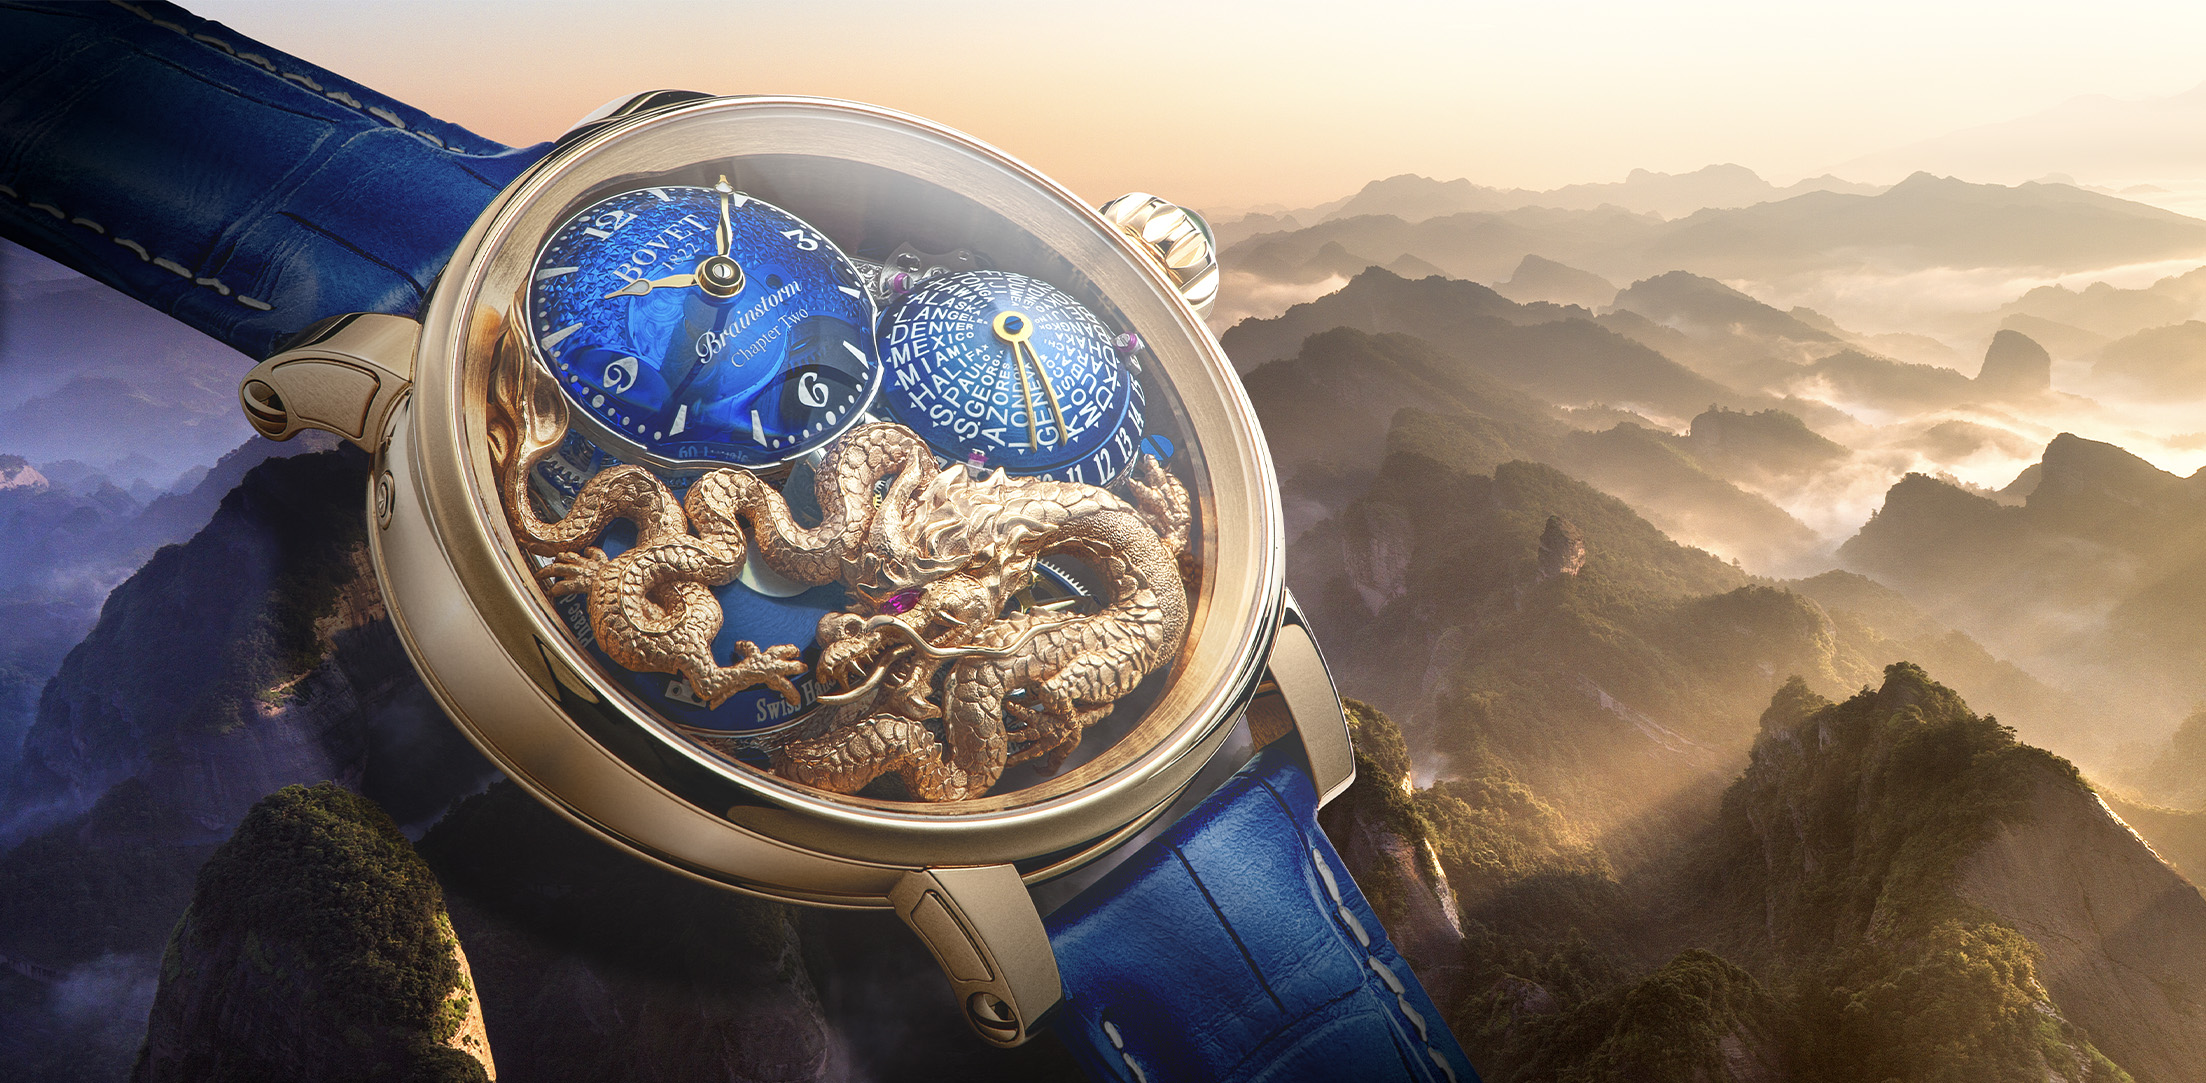 The BOVET Recital 26 Chapter Two Golden Dragon, The Revered Timepiece